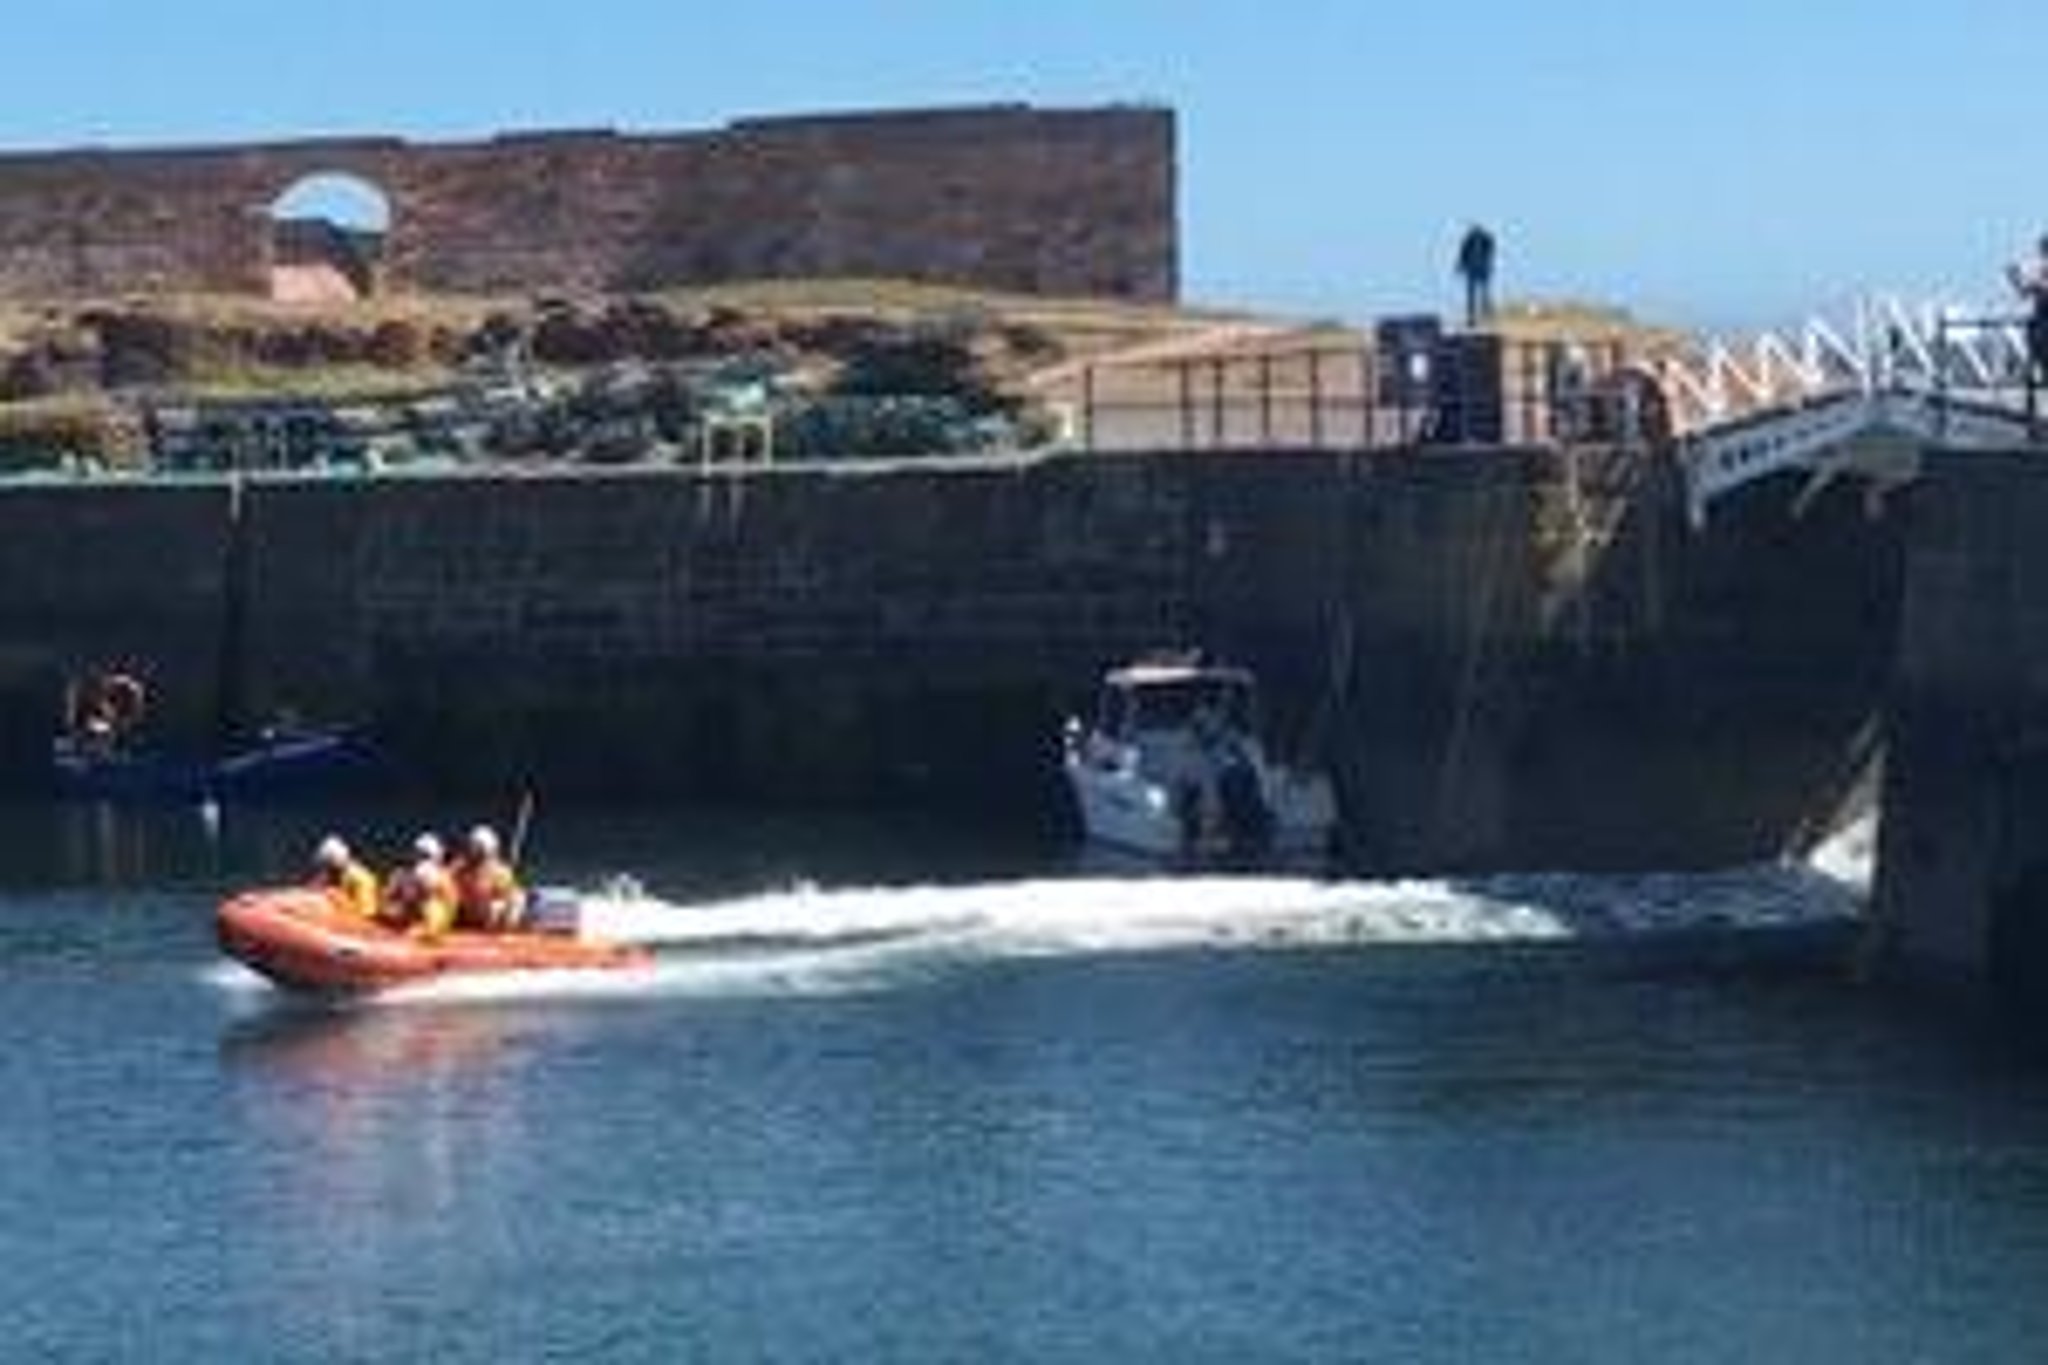 A 64-year-old fisherman has died after falling into the sea near Dunbar